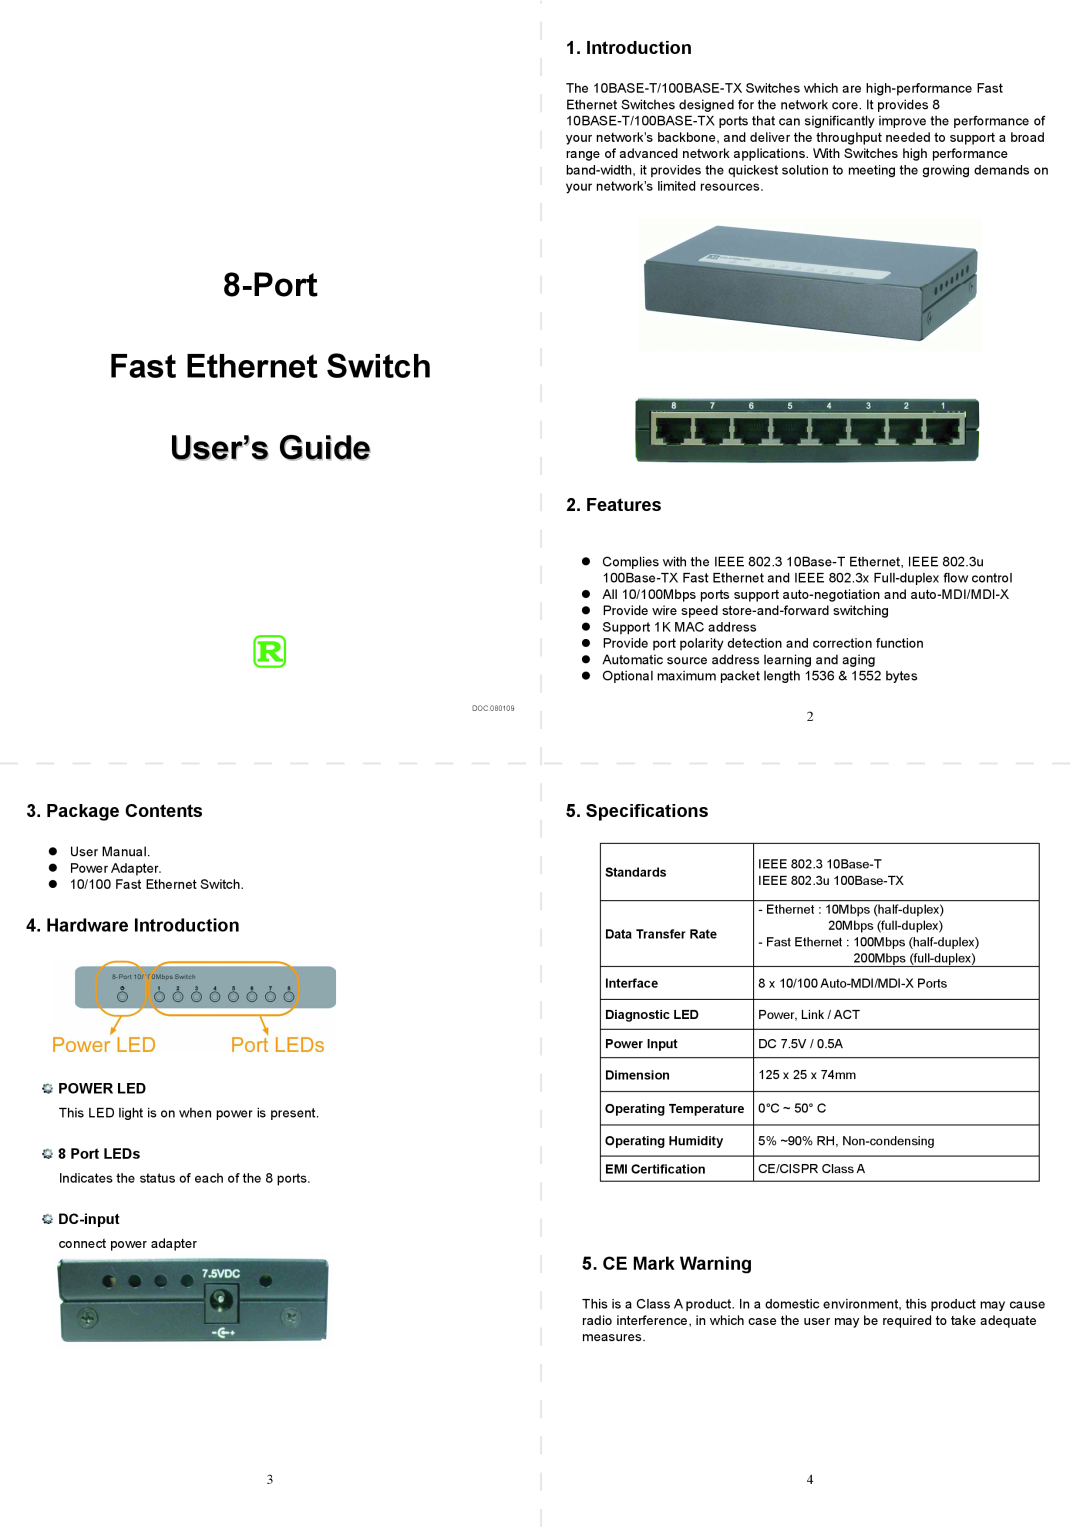 KTI Networks 10BASE-T/100BASE-TX user manual Port Fast Ethernet Switch User’s Guide, Introduction, Features, Power Led 